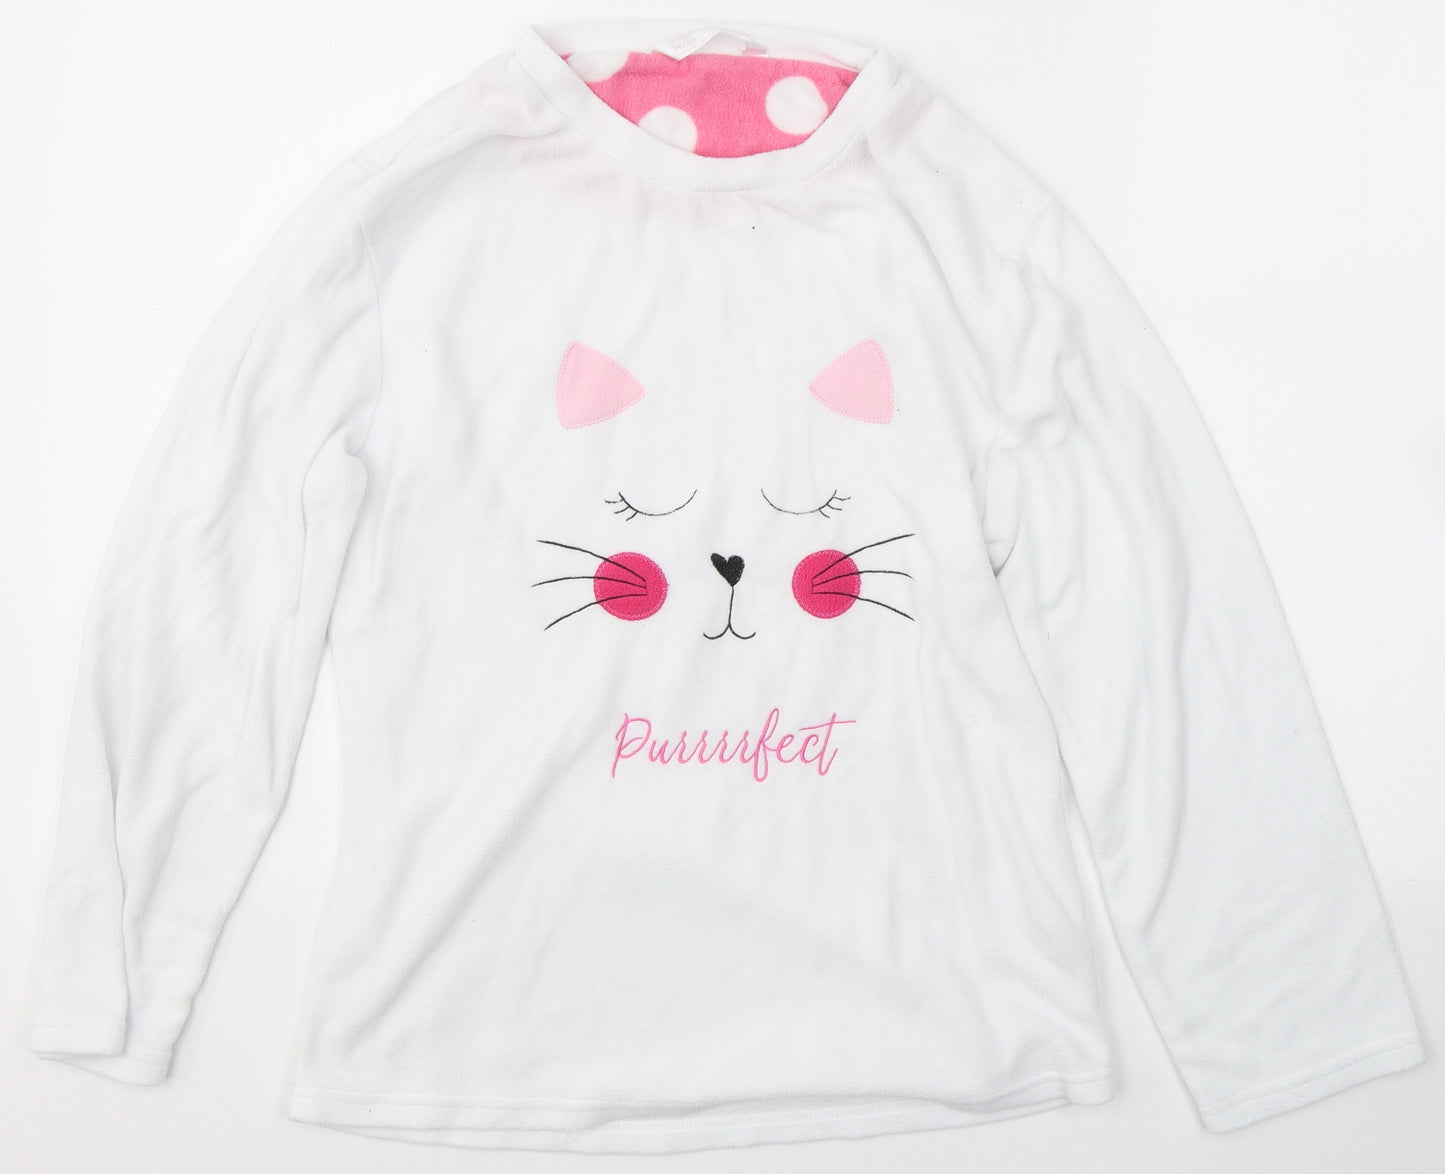 Nightwear Womens White Solid Polyester Top Pyjama Top Size 12   - purrfect kitty